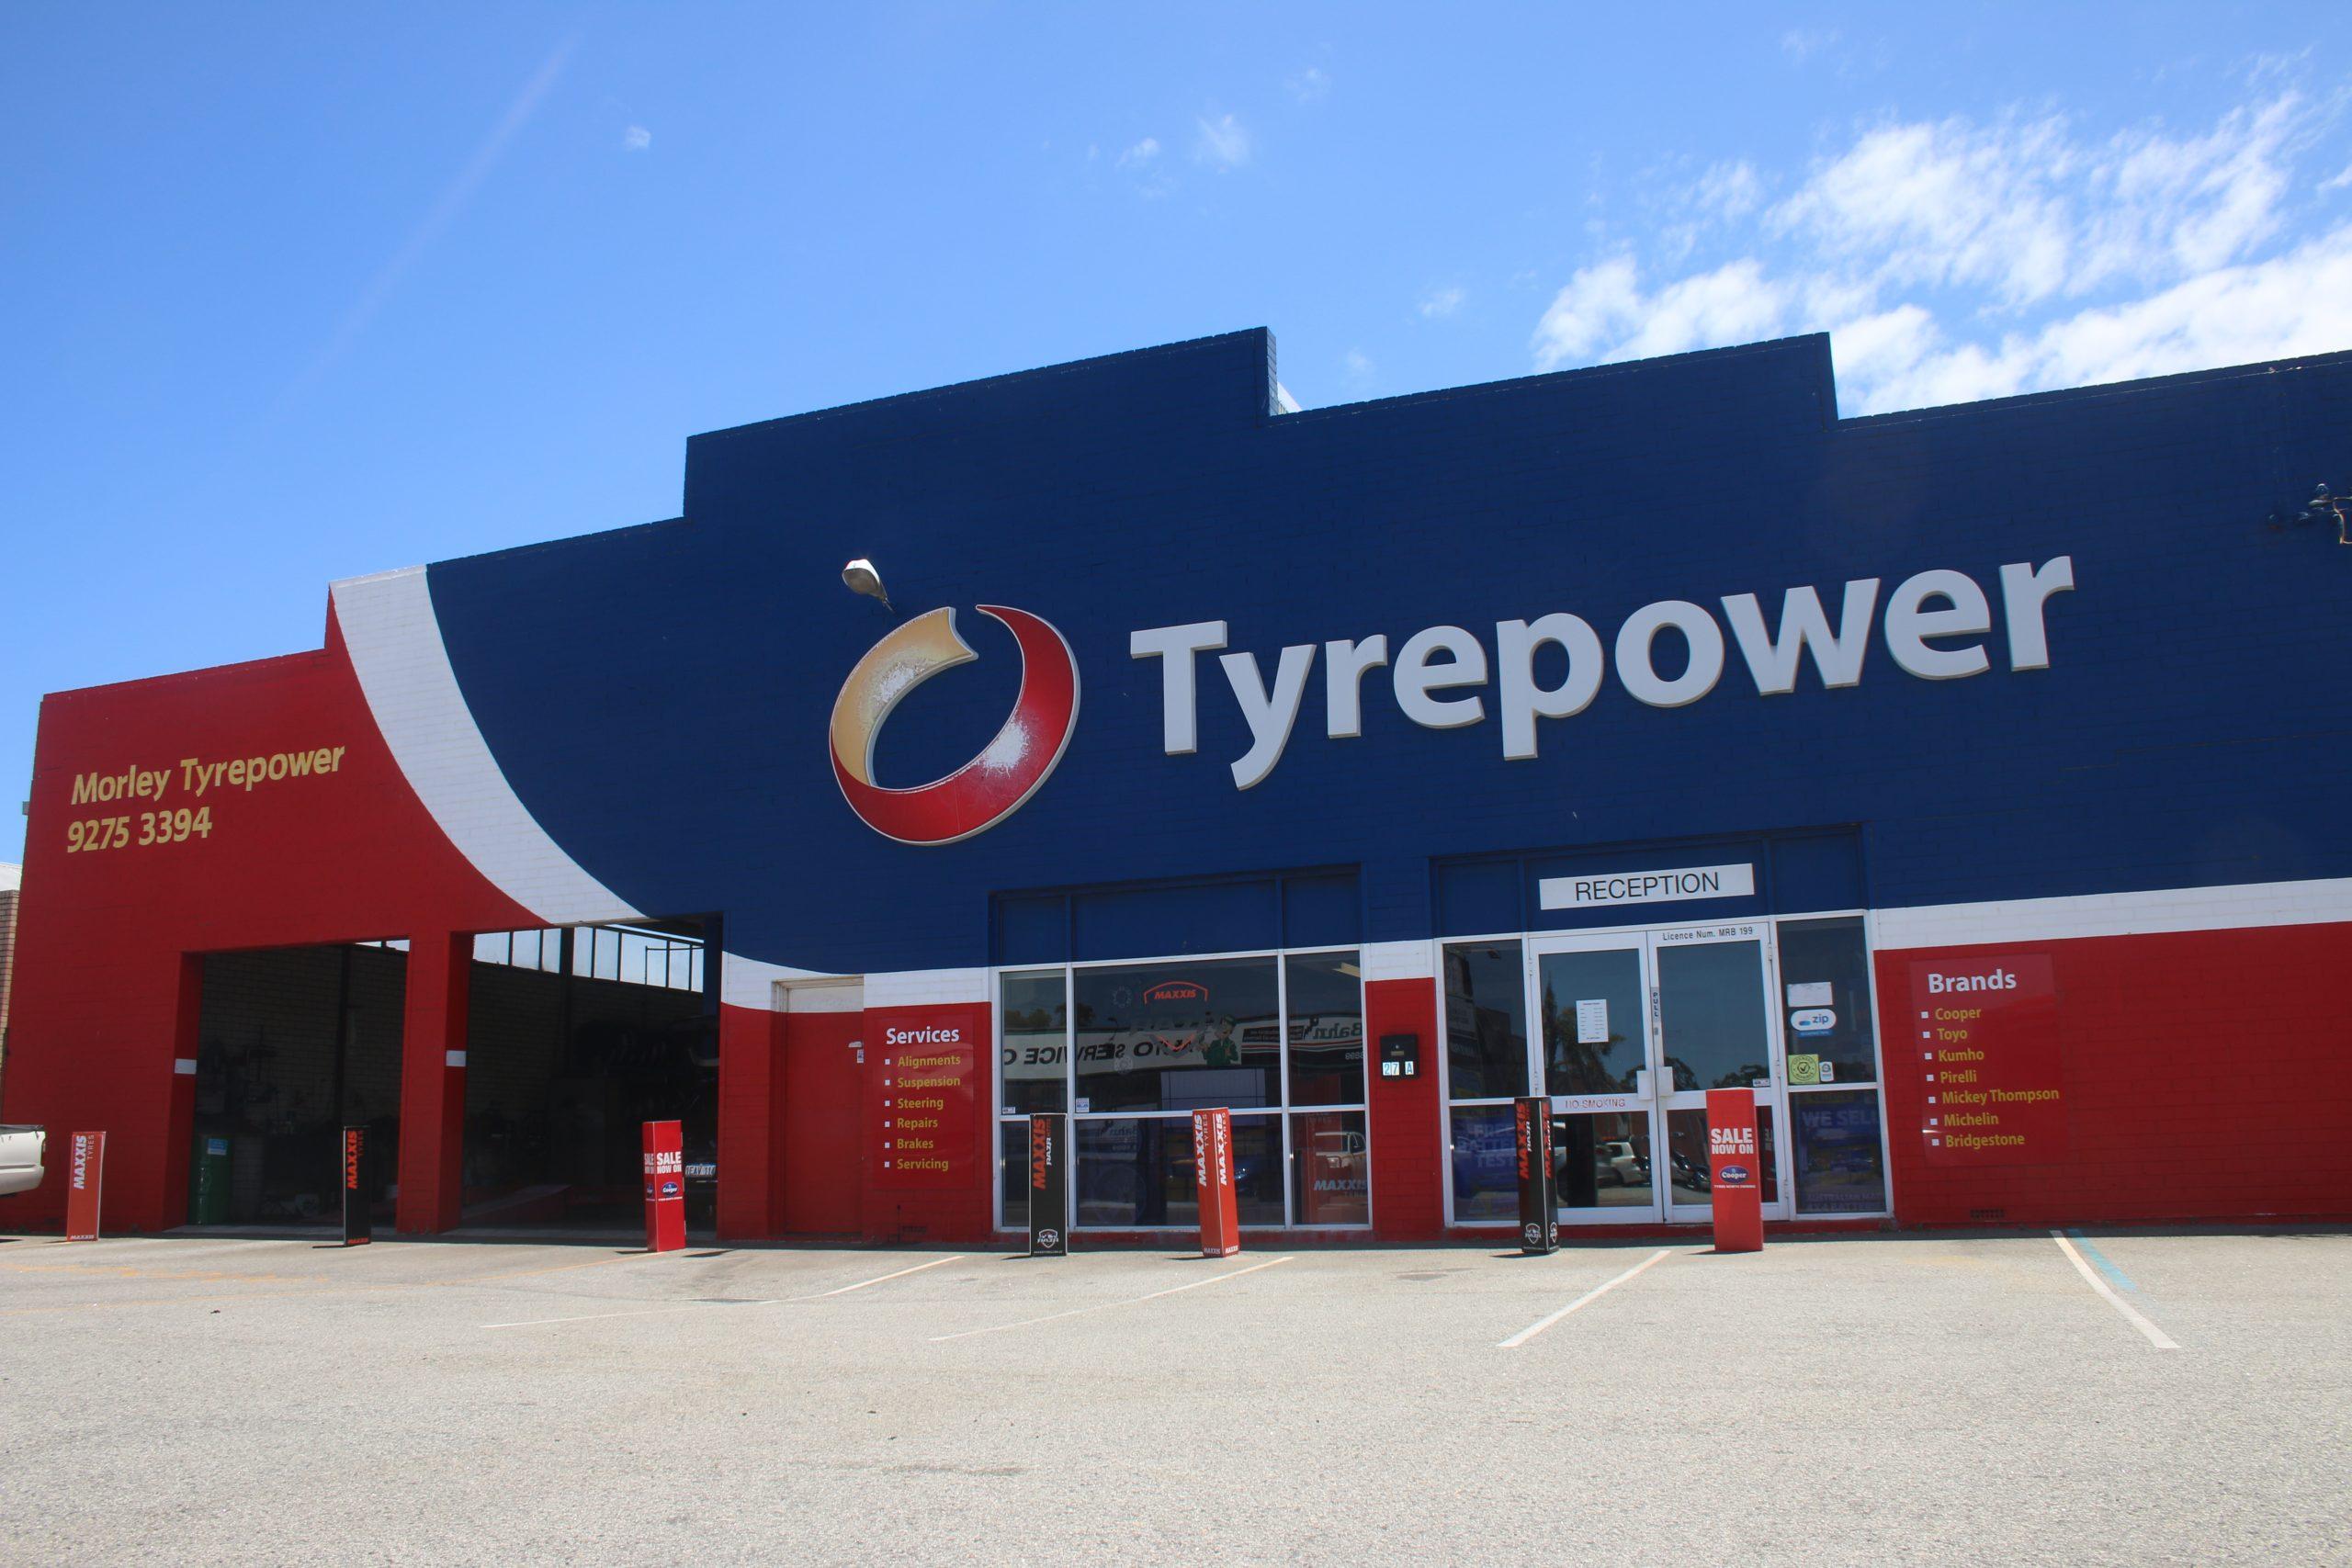 Images Morley Tyrepower